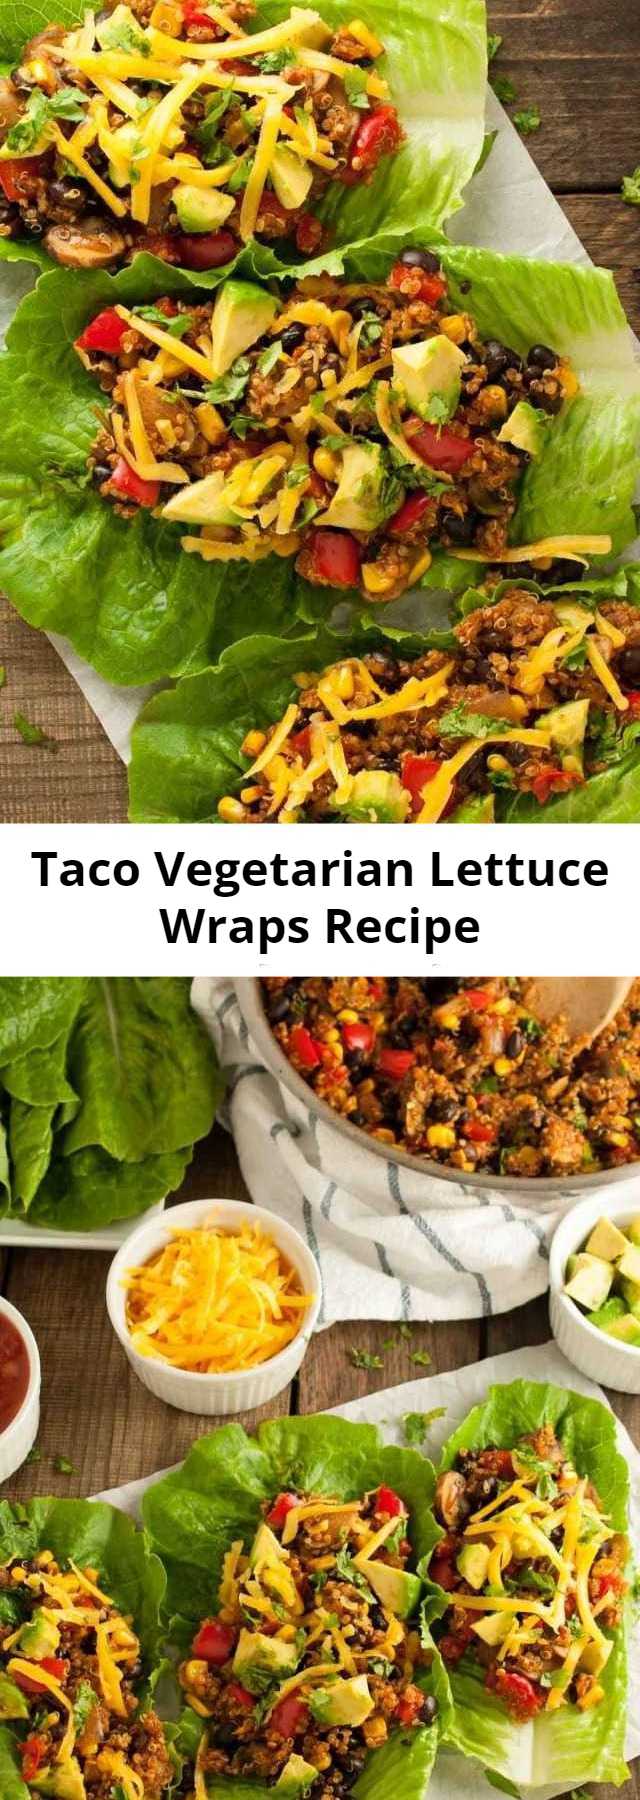 Taco Vegetarian Lettuce Wraps Recipe - Taco vegetarian lettuce wraps with quinoa and black beans put a tasty spin on tacos that will actually keep you full with 16 grams of protein per serving!